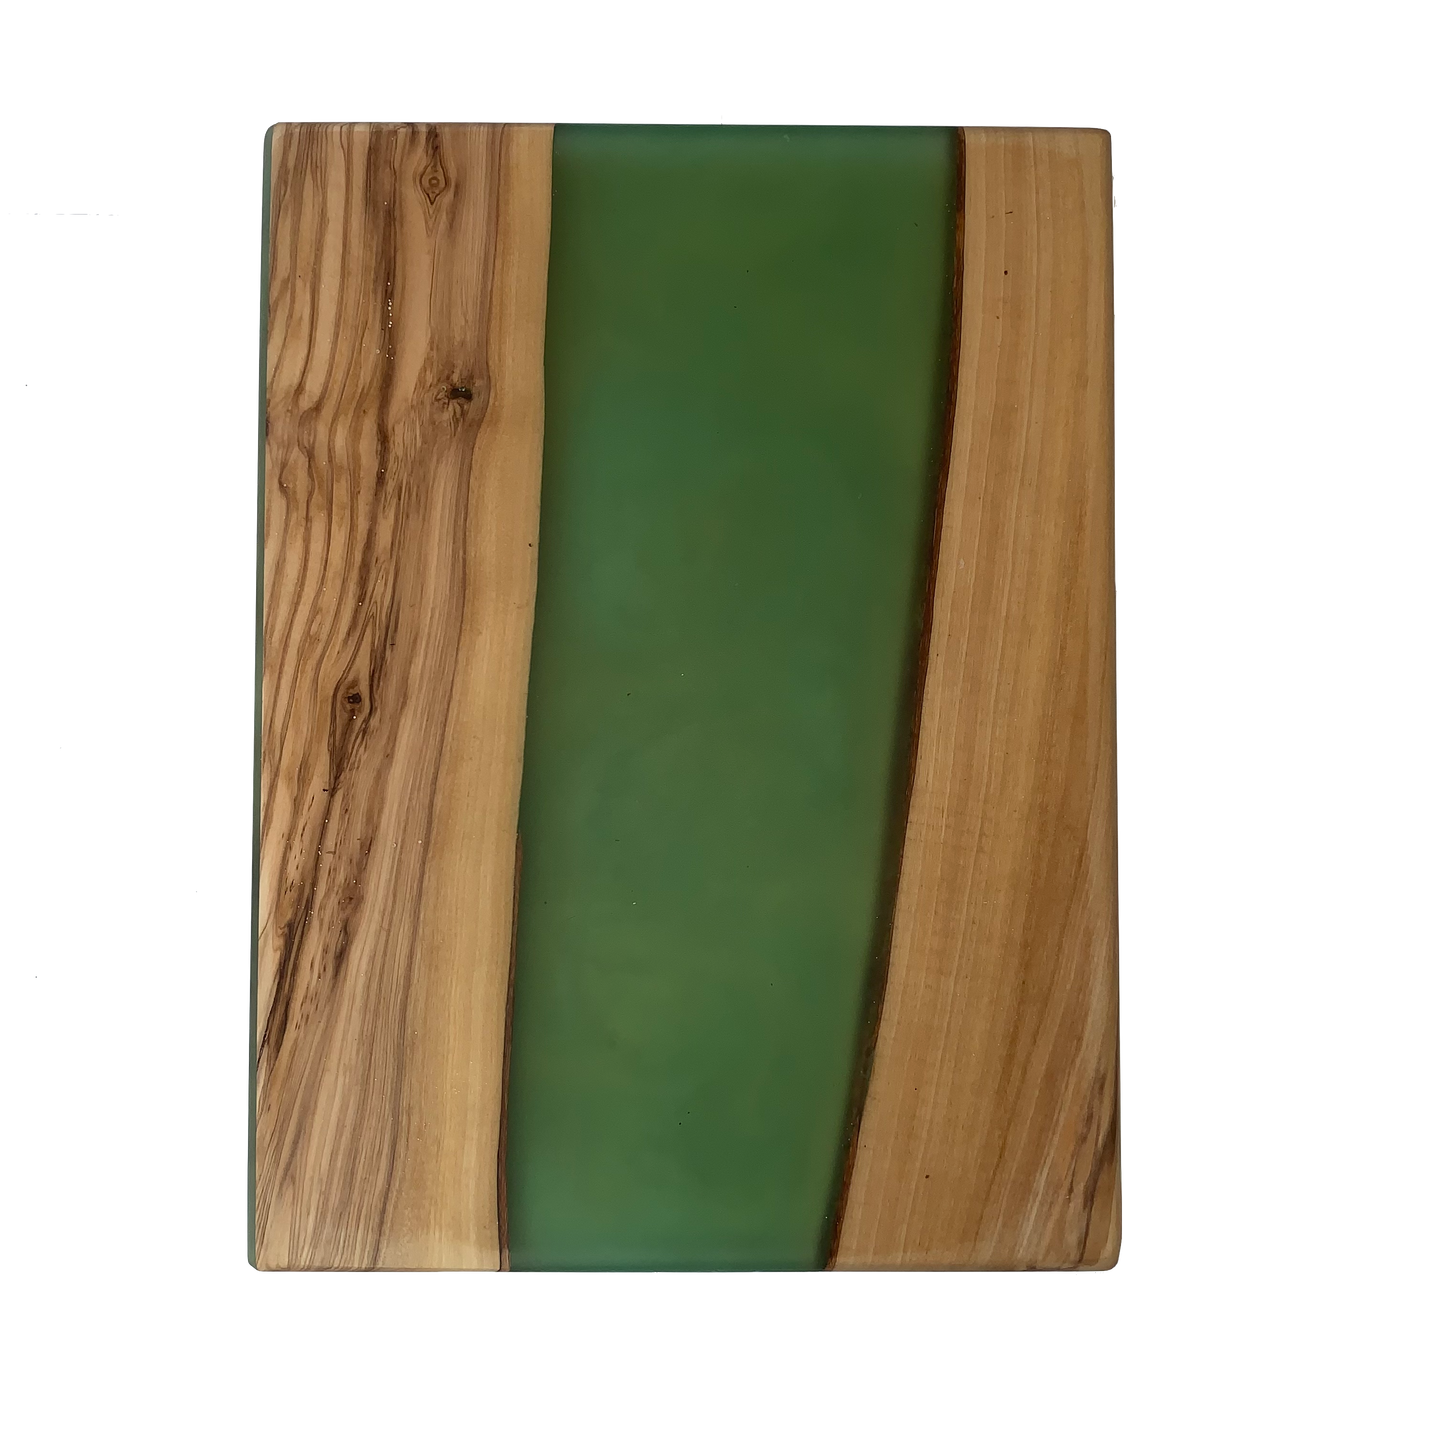 Olive Wood and Green Resin Serving Board